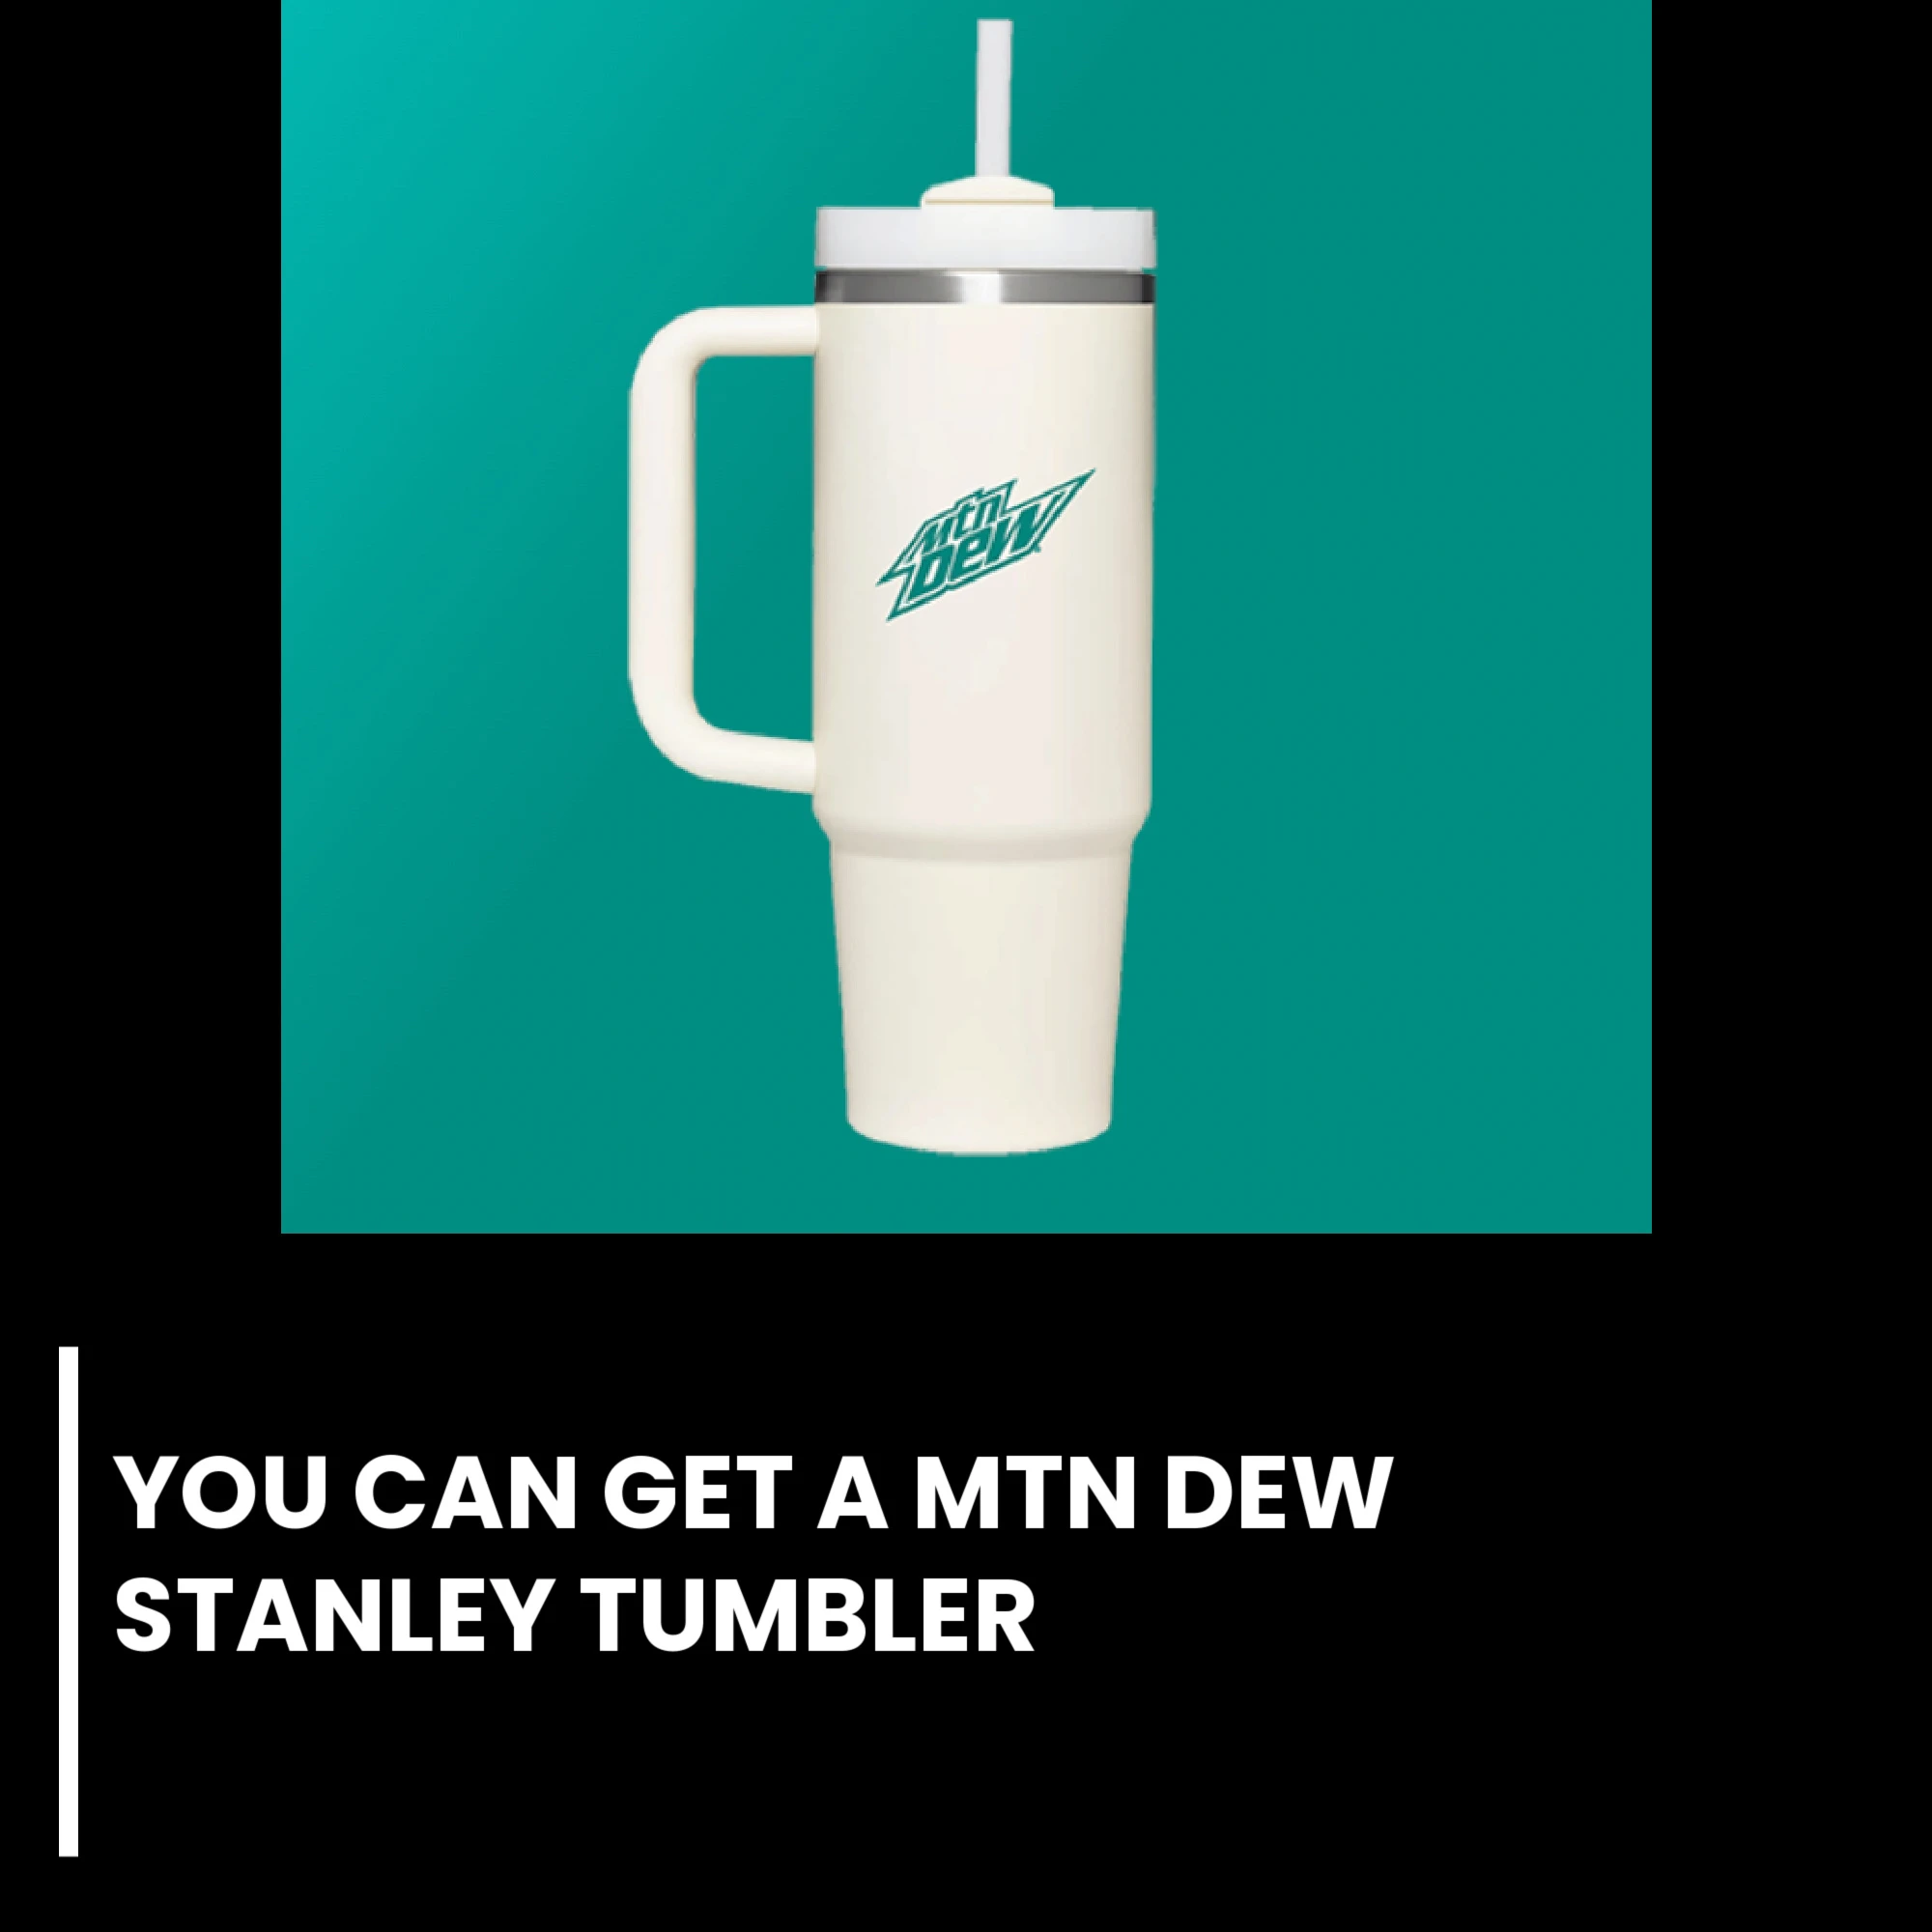 Stanley Just Dropped 7 New Tumbler Colors So, Get Your Wallets Ready